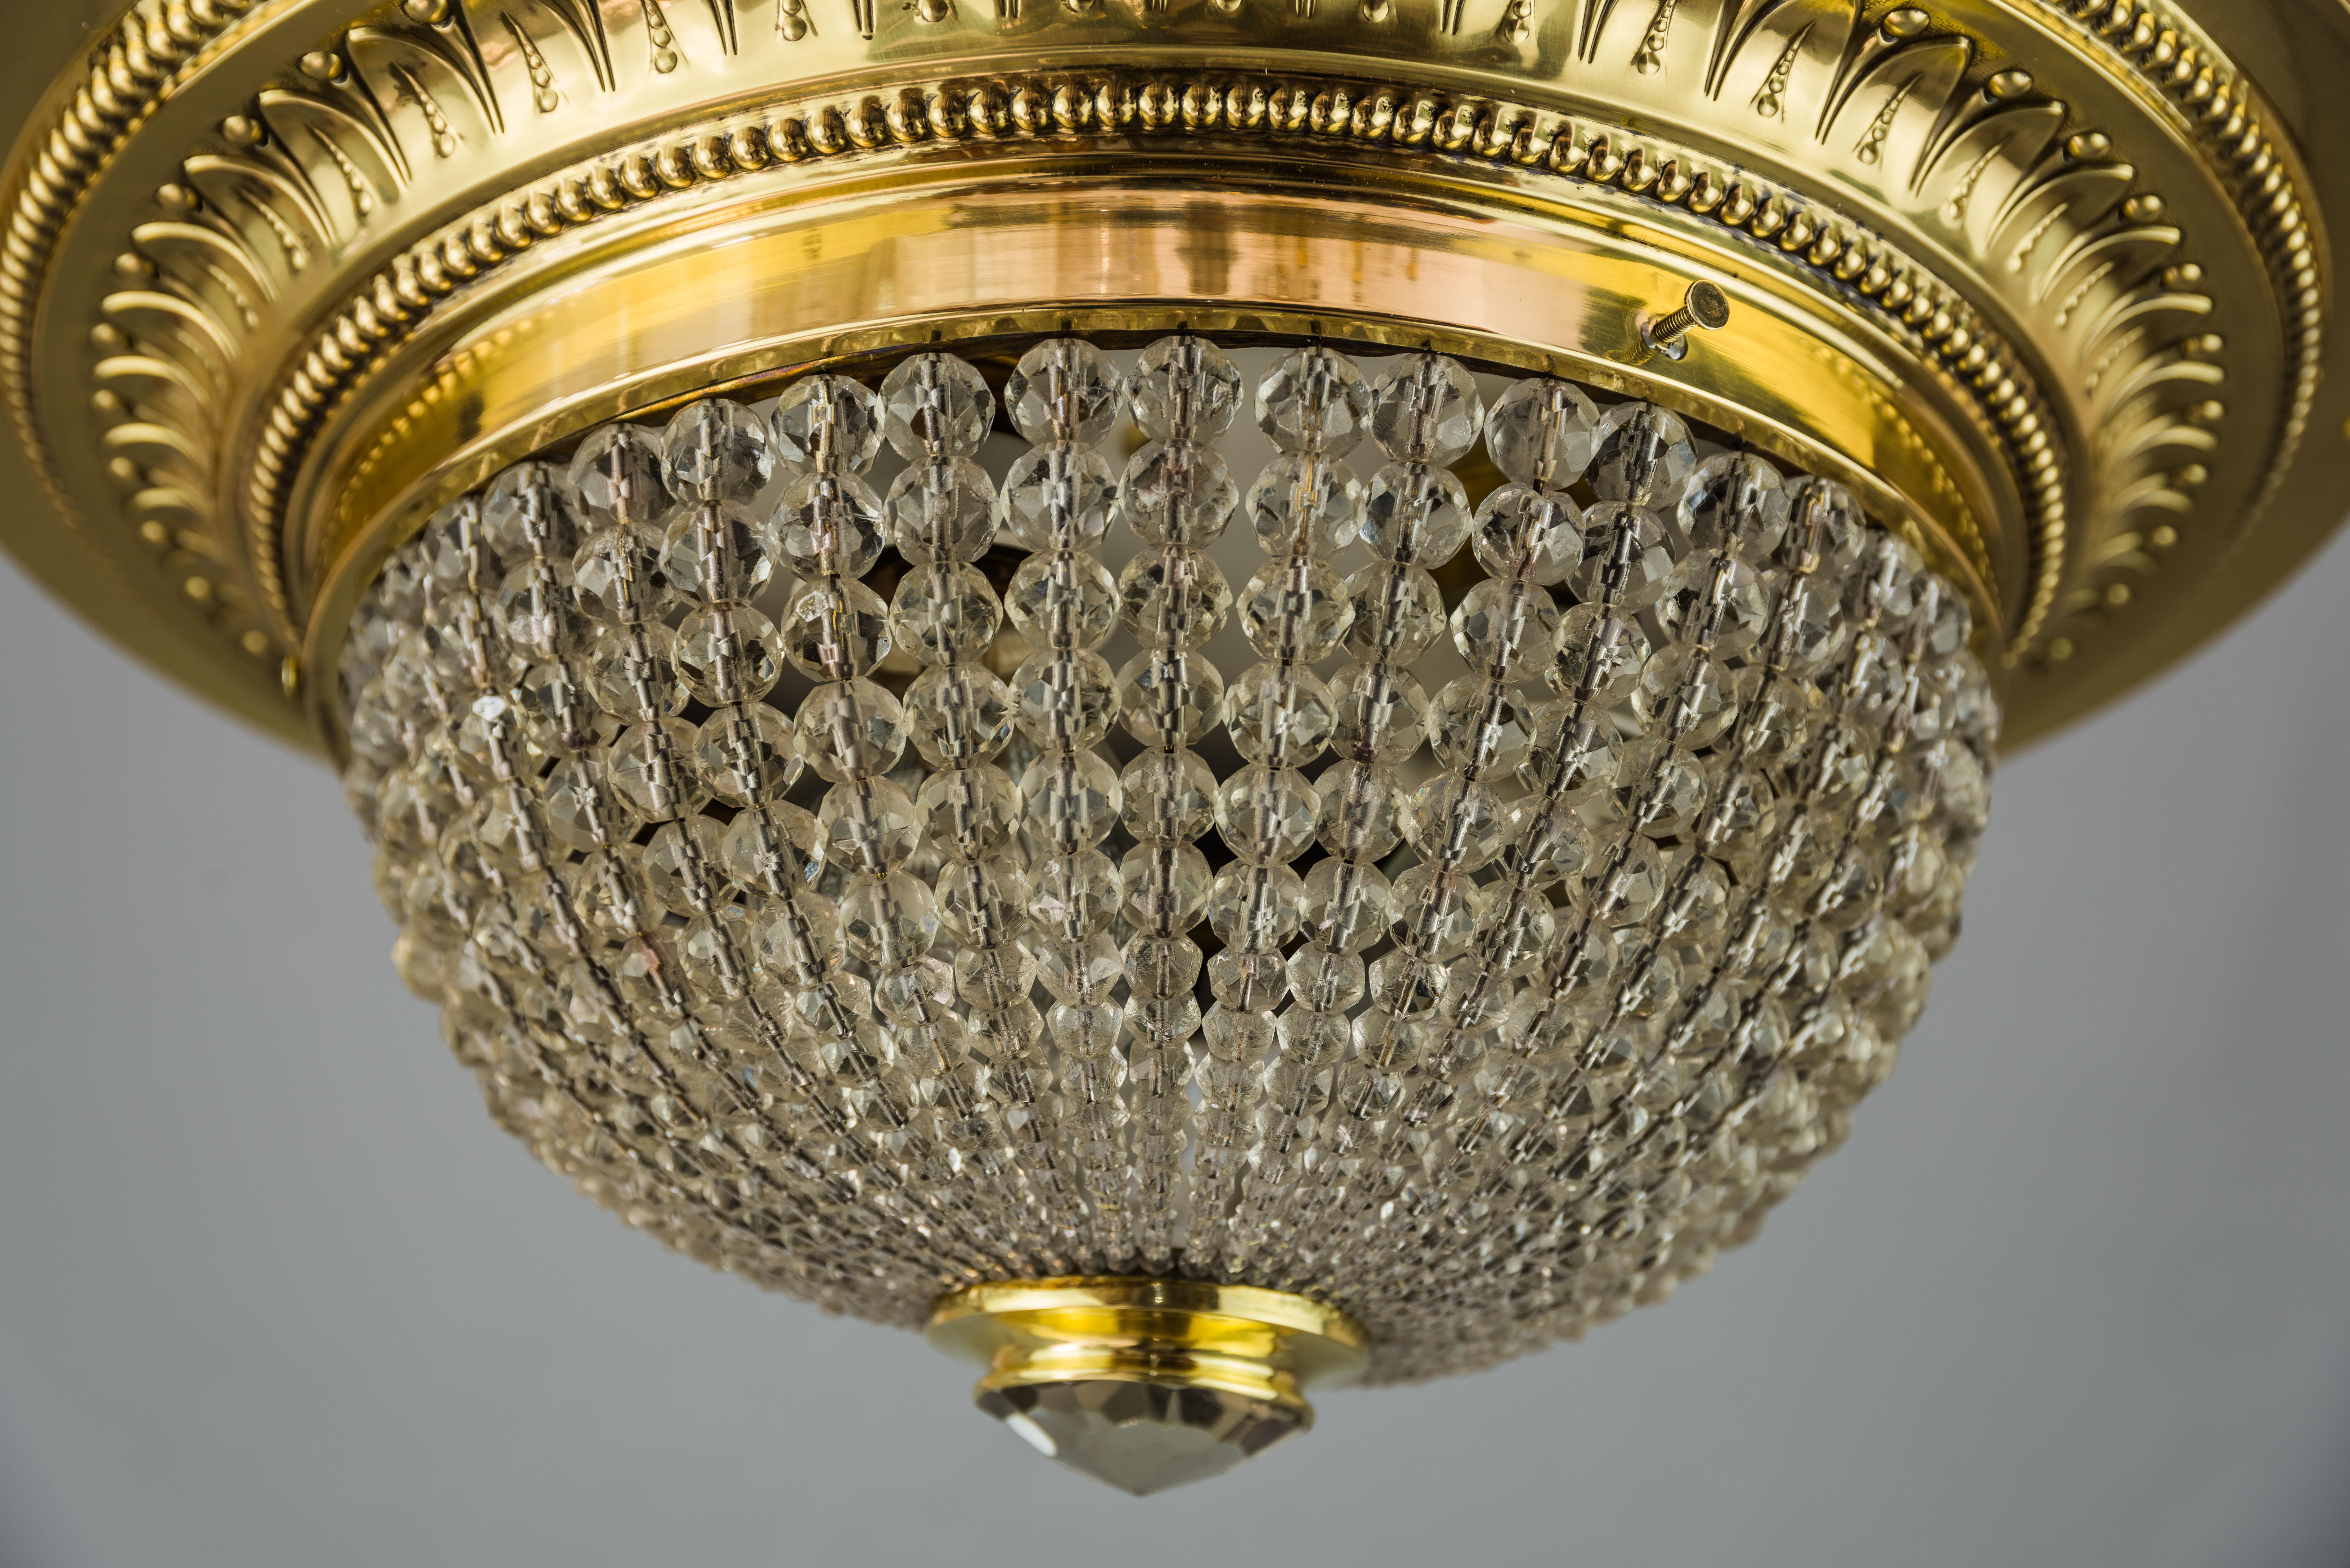 Austrian Art Deco Ceiling Lamp with Small Cut Glass Balls, circa 1920s For Sale